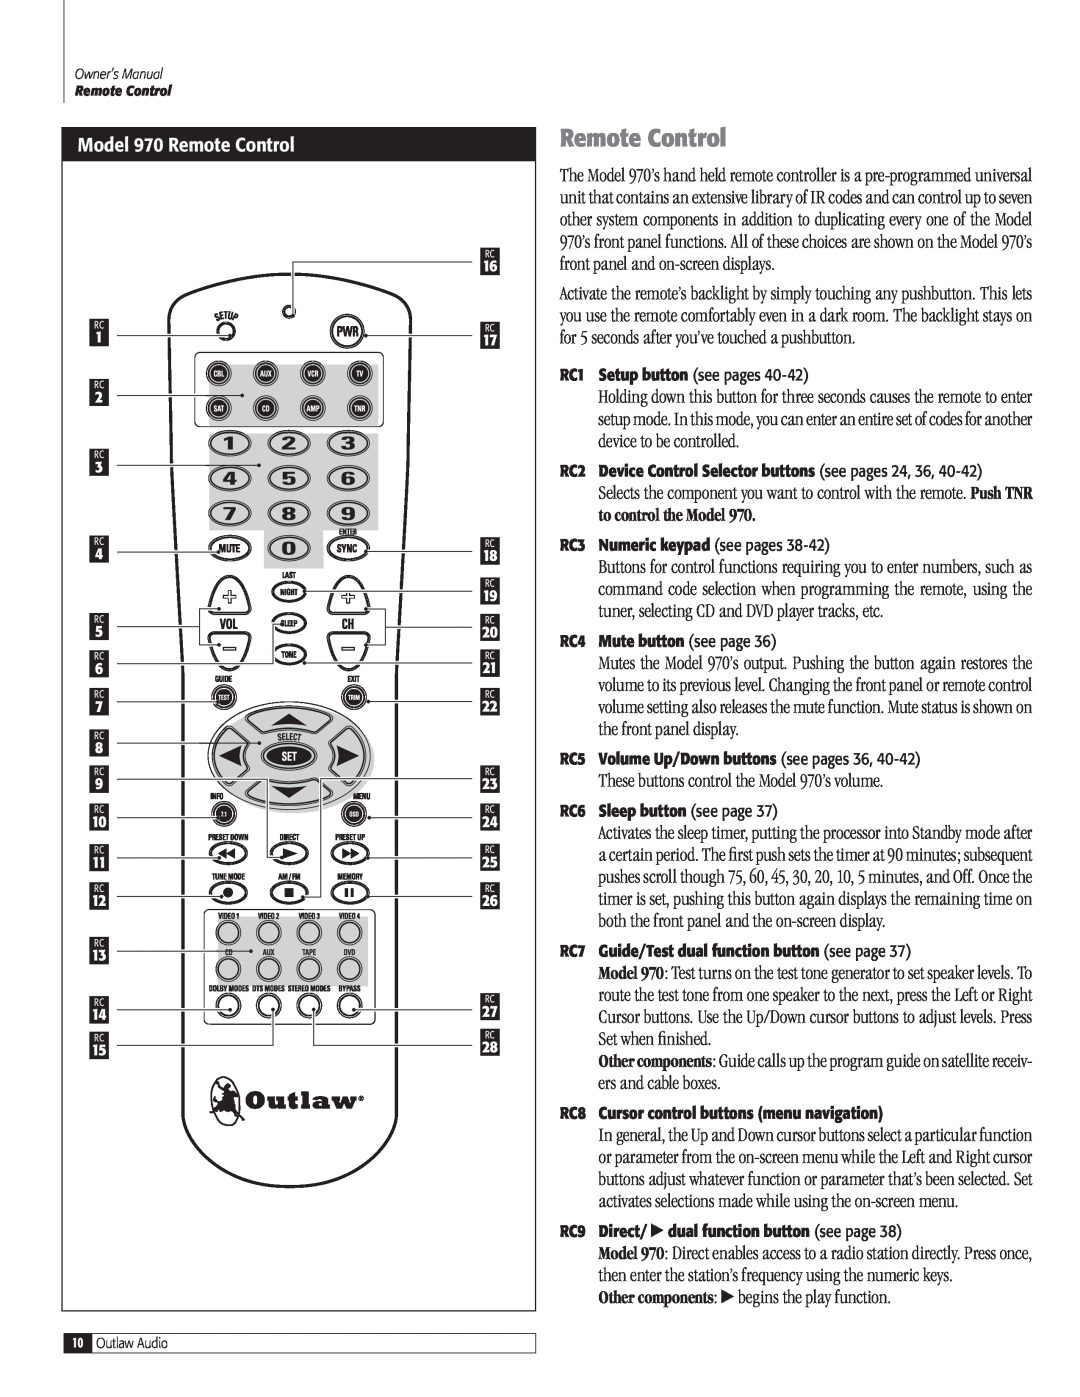 Outlaw Audio Model 970 Remote Control, These buttons control the Model 970’s volume, to control the Model 